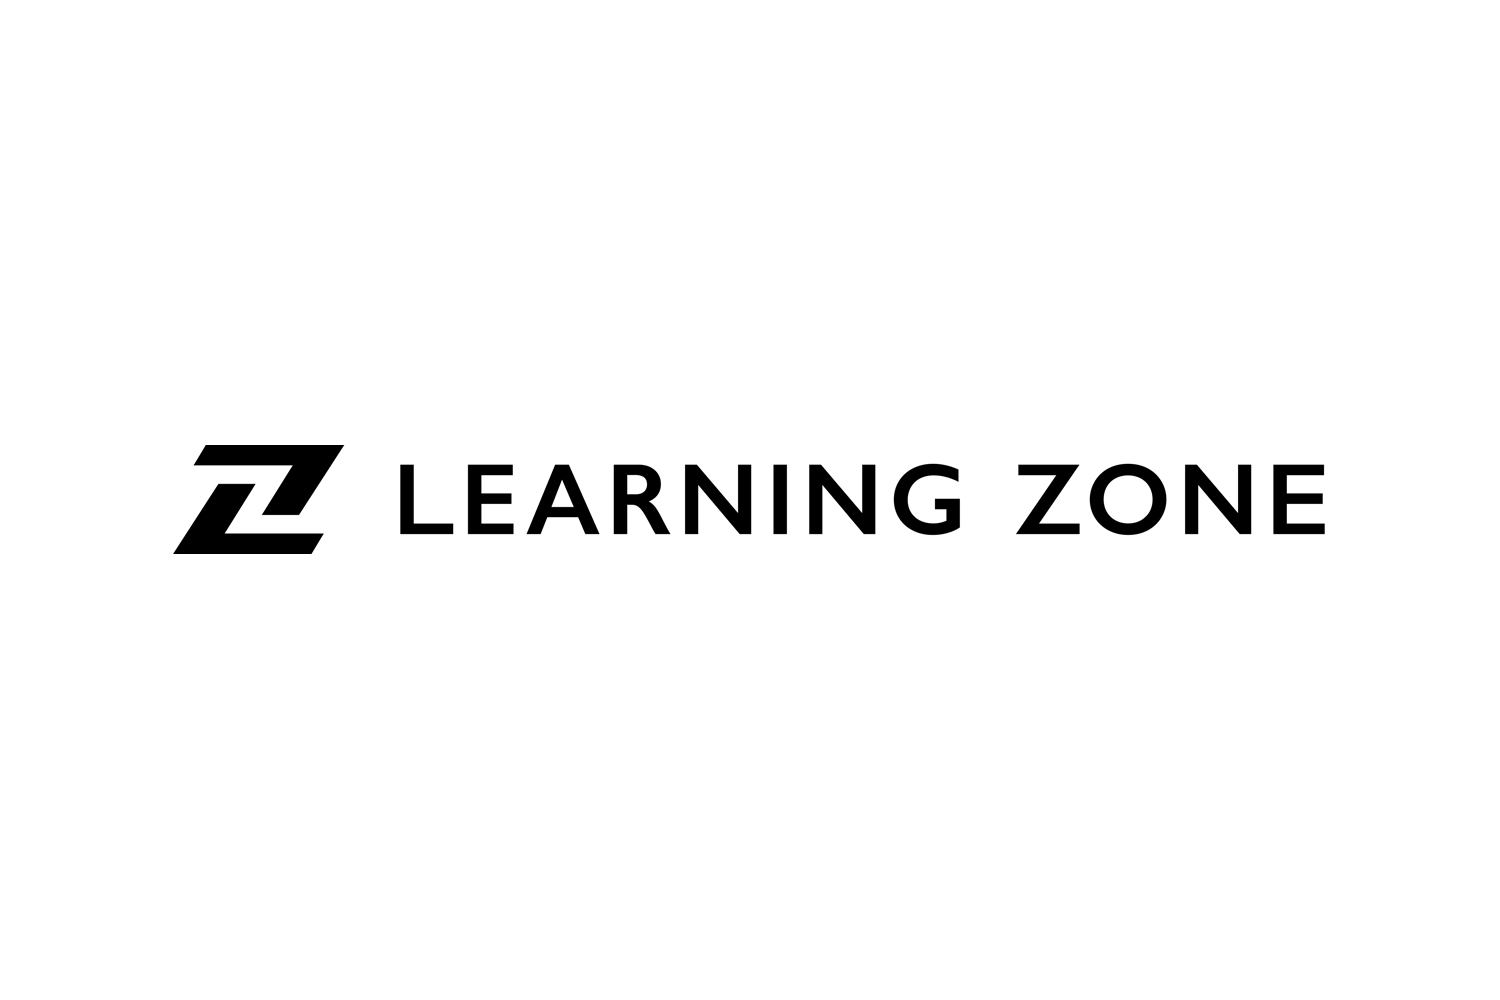 LEARNING ZONE